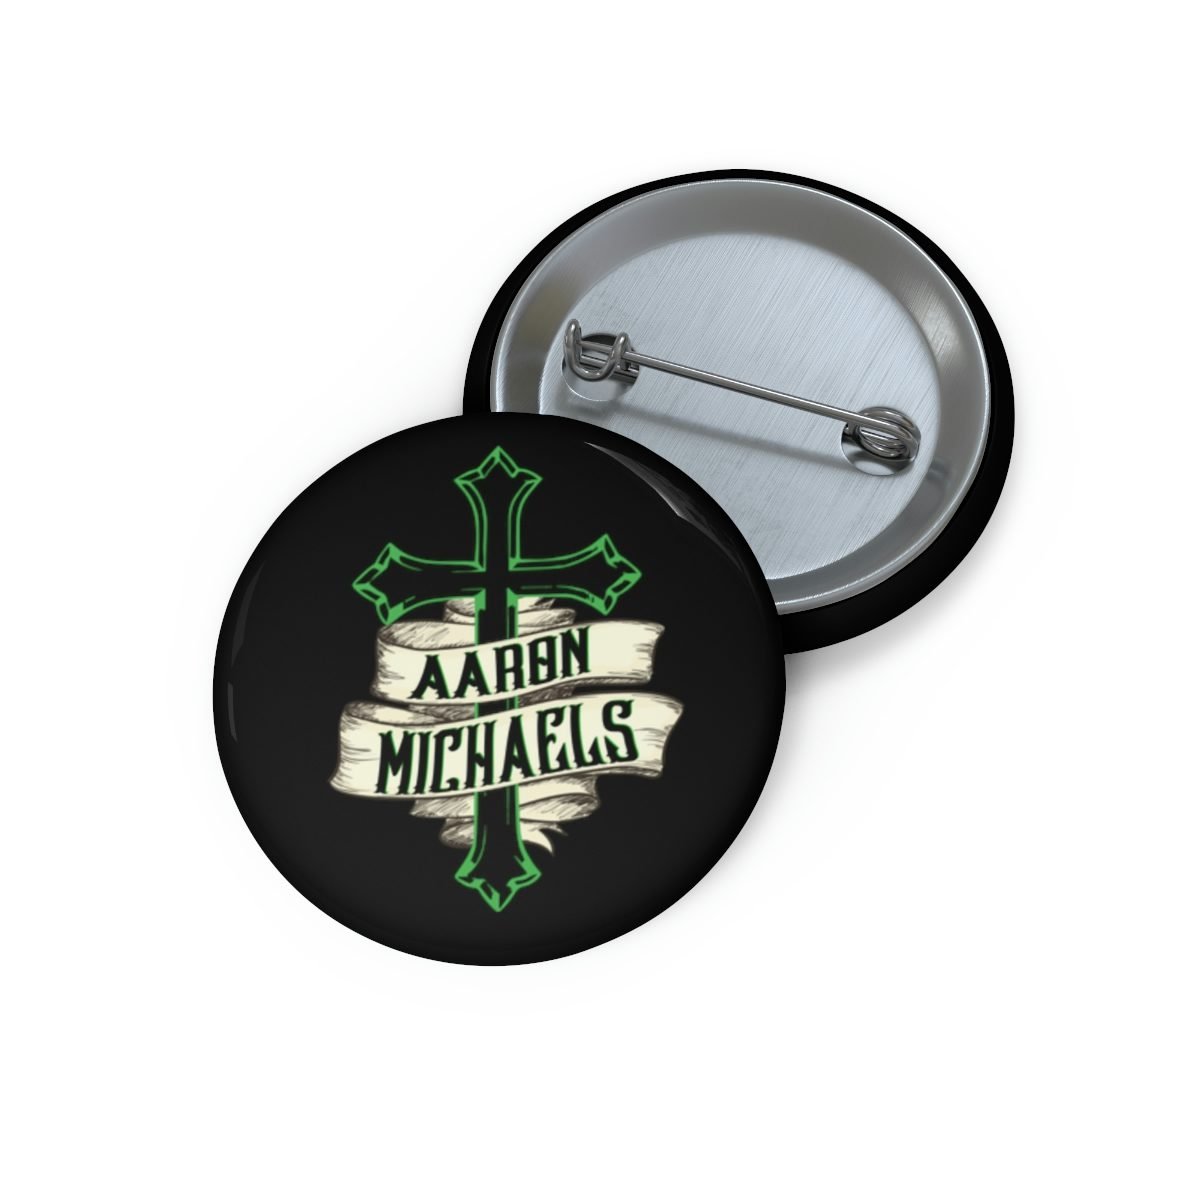 Aaron Michaels Cross and Banner Pin Buttons